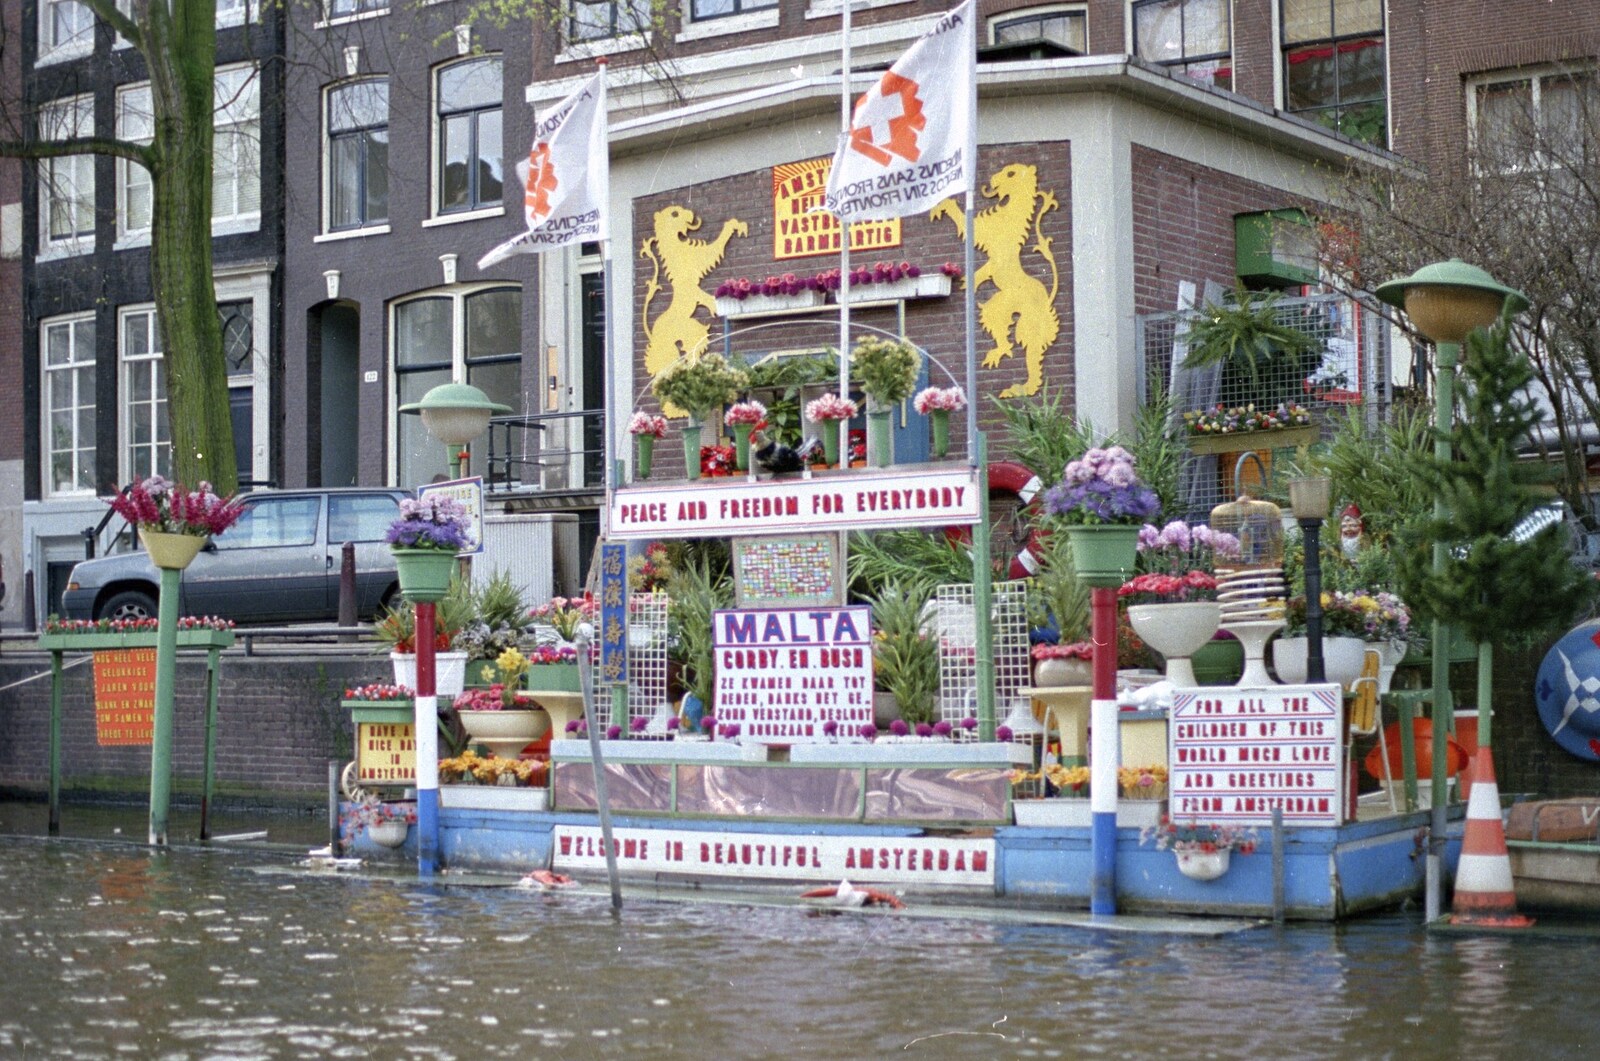 Out and About in Amsterdam, Hoorne, Vollendam and Edam, The Netherlands - 26th March 1992: A gaudy floating homage to Malta